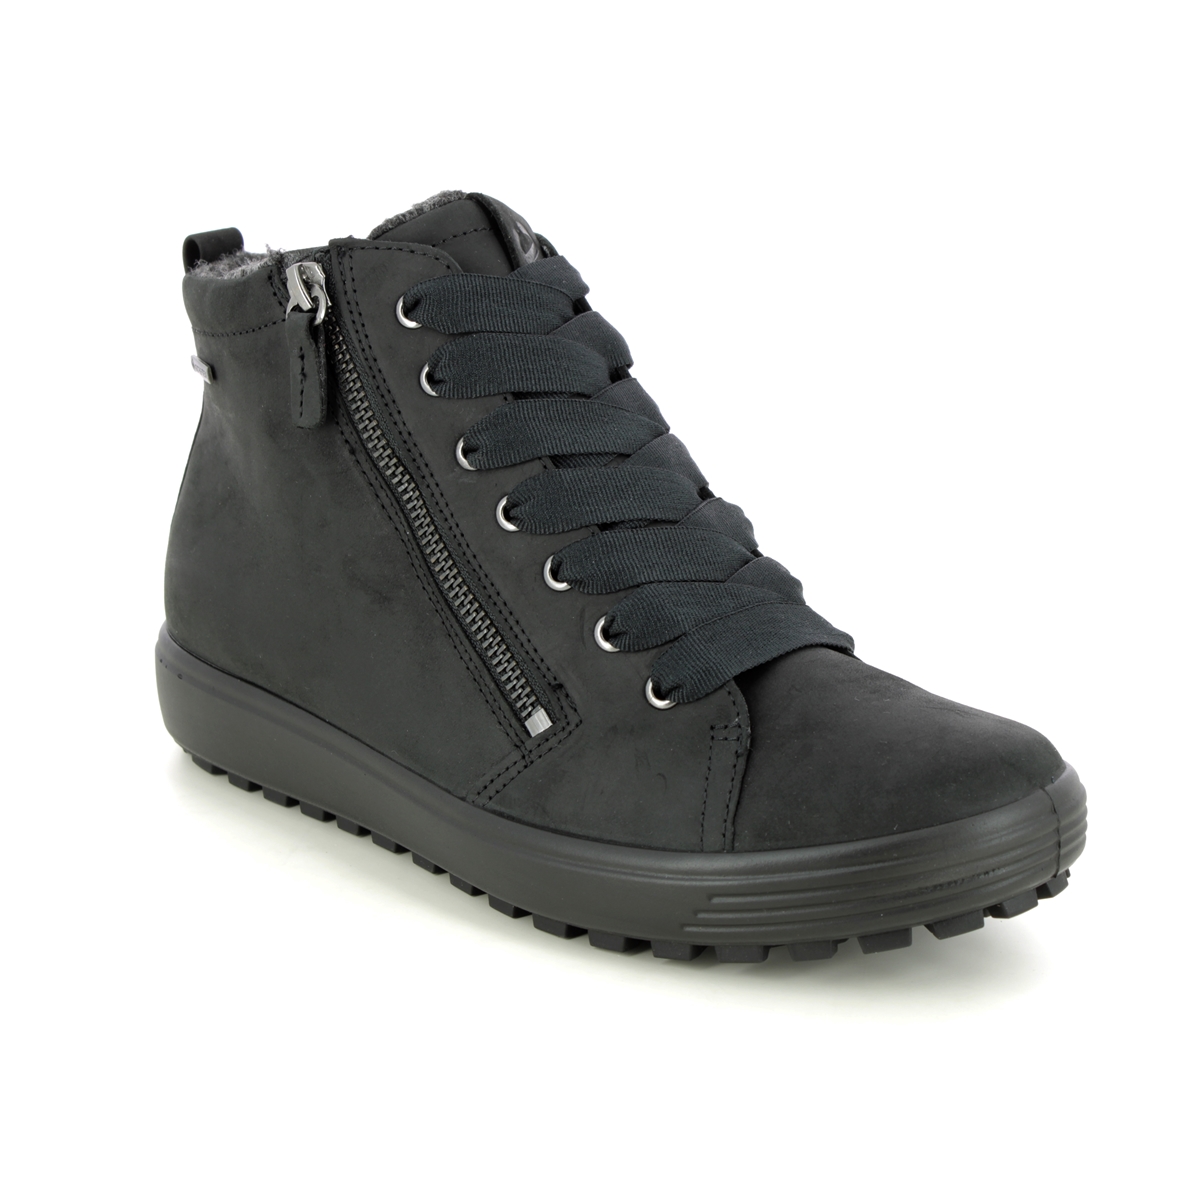 ECCO Soft 7 Tred Gtx Black Womens Hi Tops 450163-02001 in a Plain Leather in Size 40